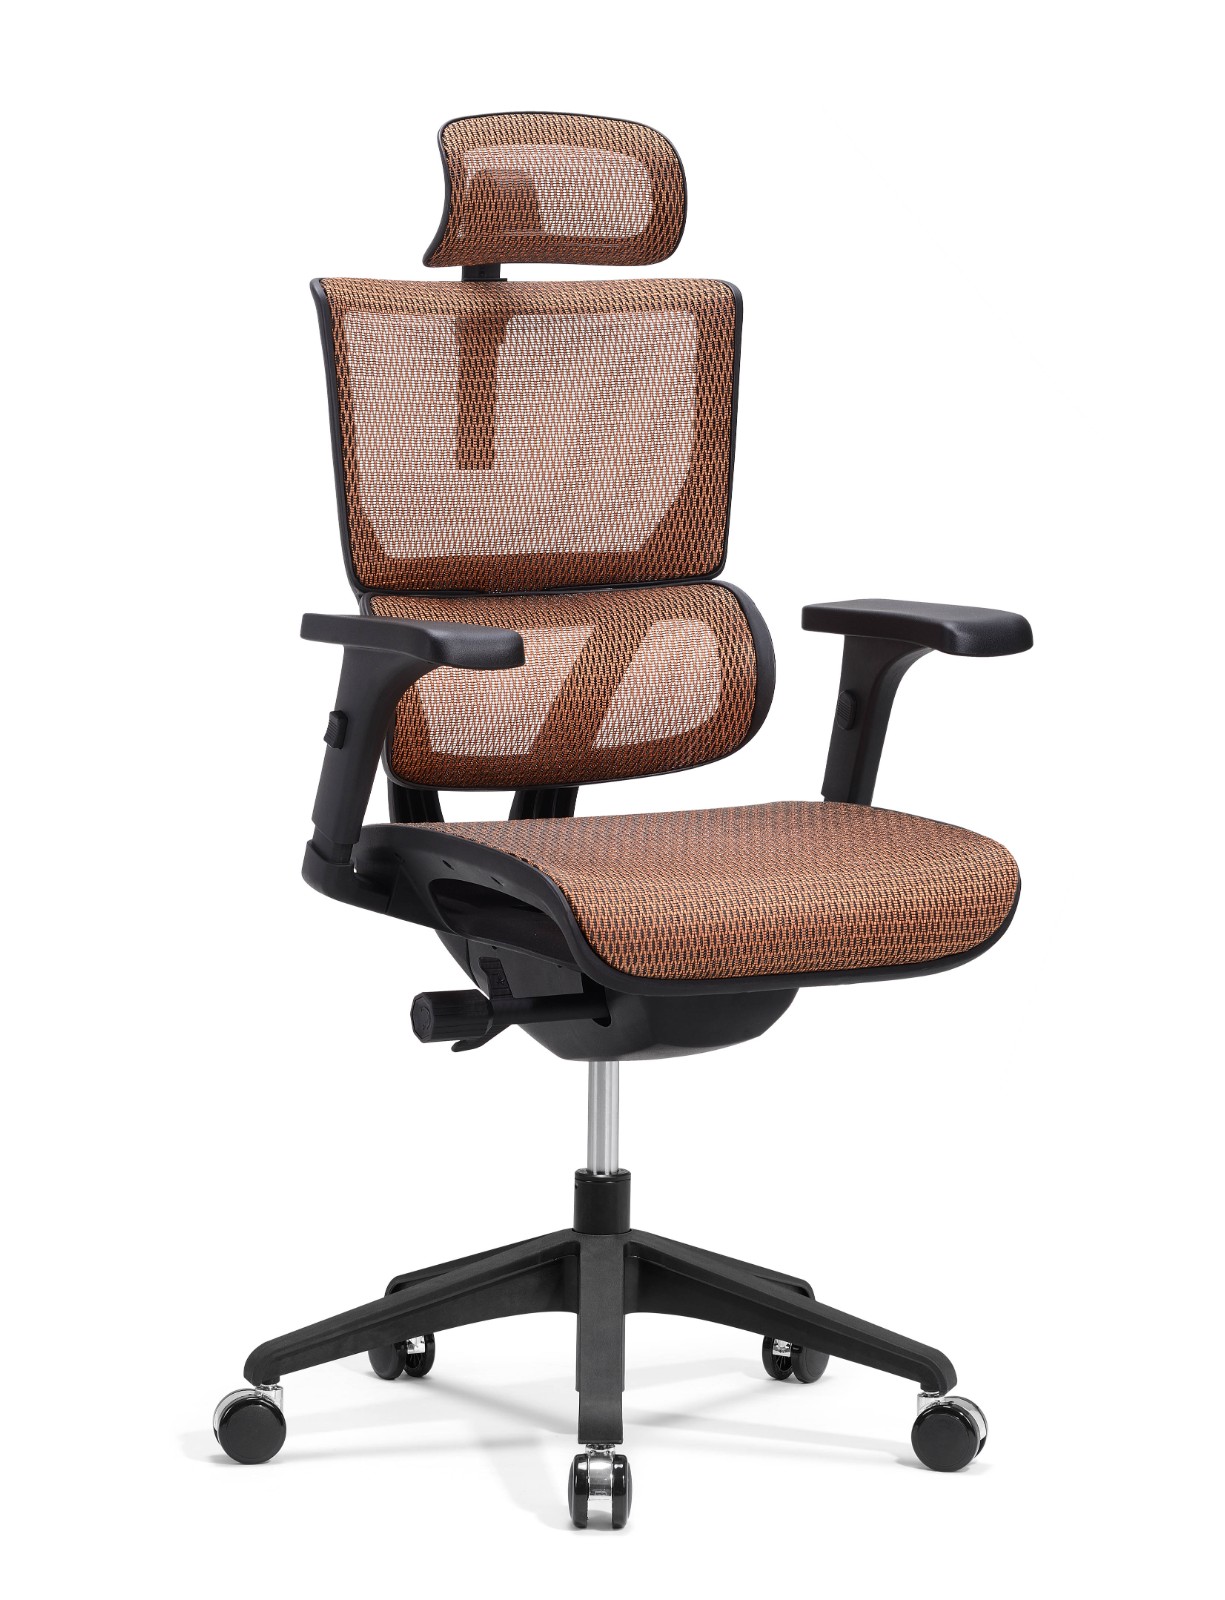 news-Stylish Feminine Office Chairs for woman or short person - Vision Chair-Hookay Chair-img-1